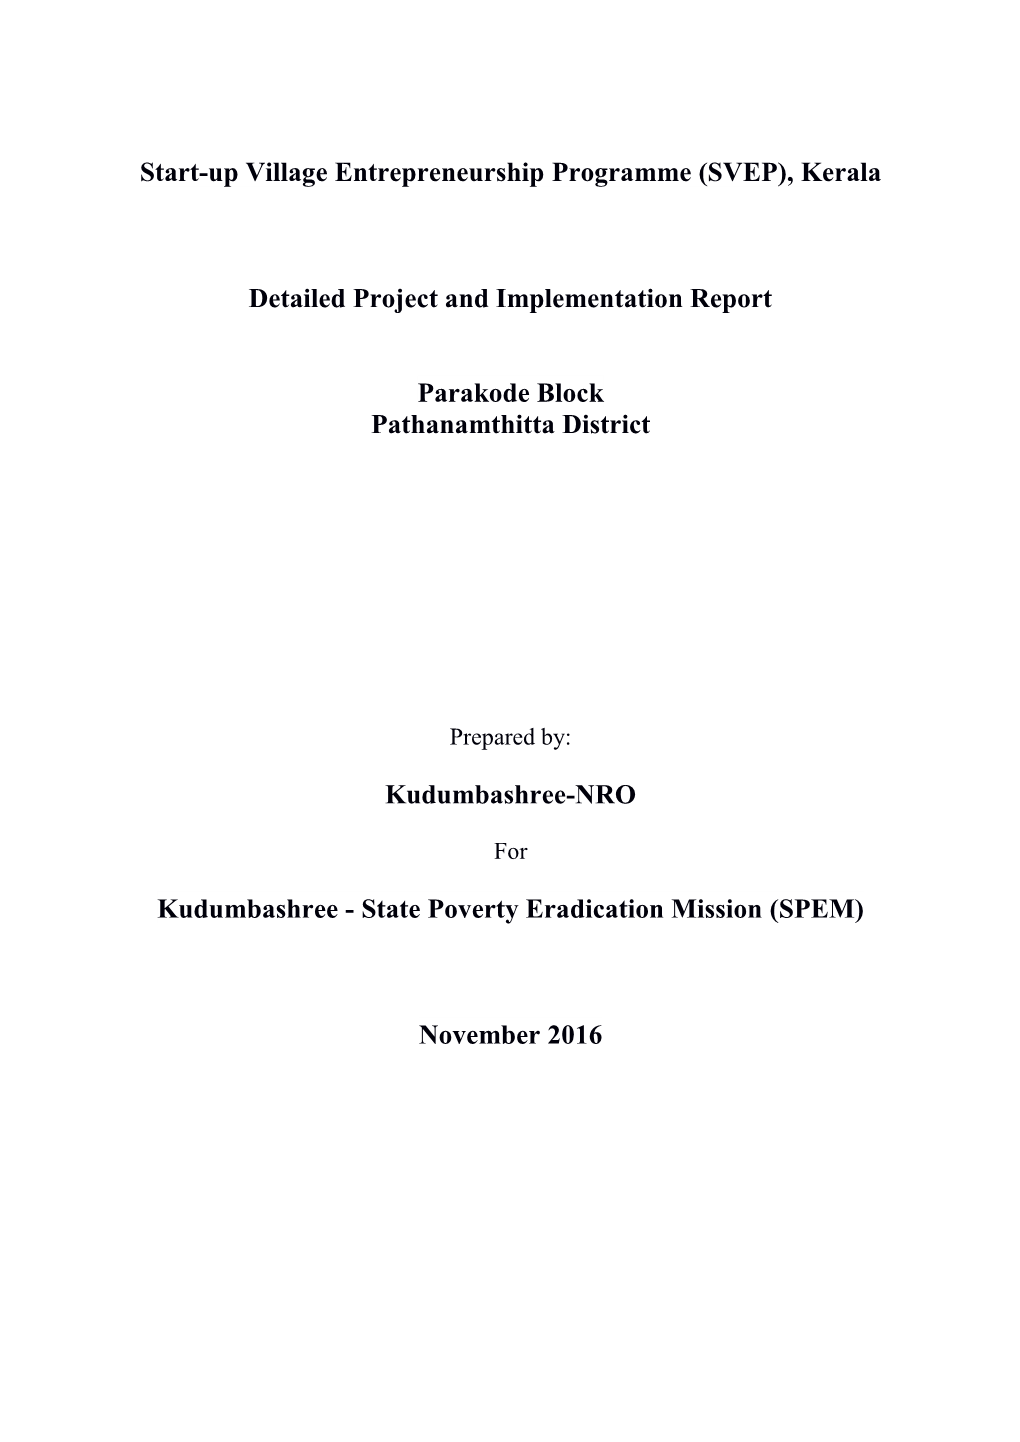 (SVEP), Kerala Detailed Project and Implementation Report Parakode